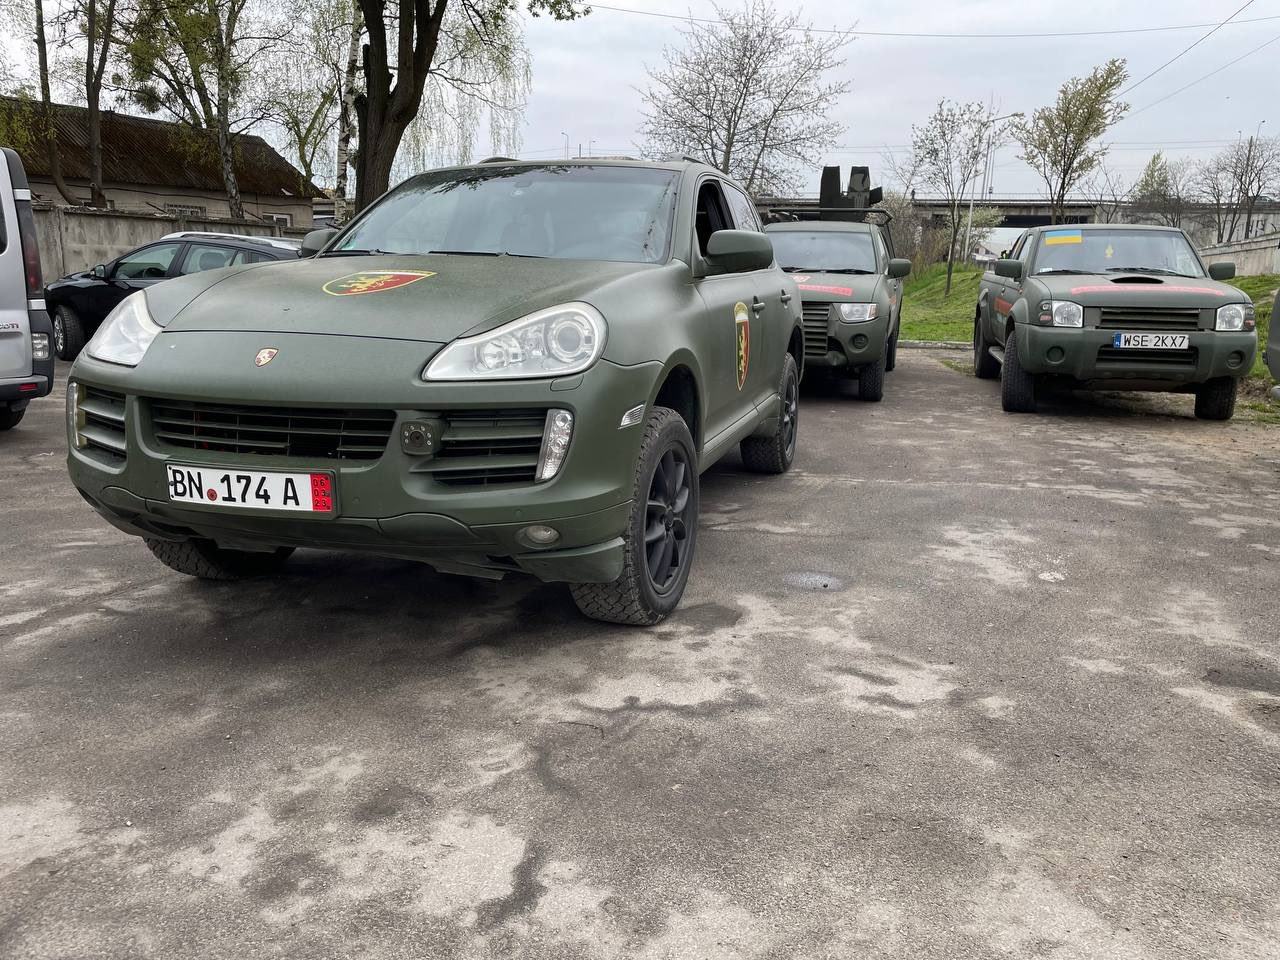 The Porsche is just one of the 244 vehicles Car4Ukraine has retrofitted and sent to serve the Ukrainian military. Photo: Car4Ukraine 